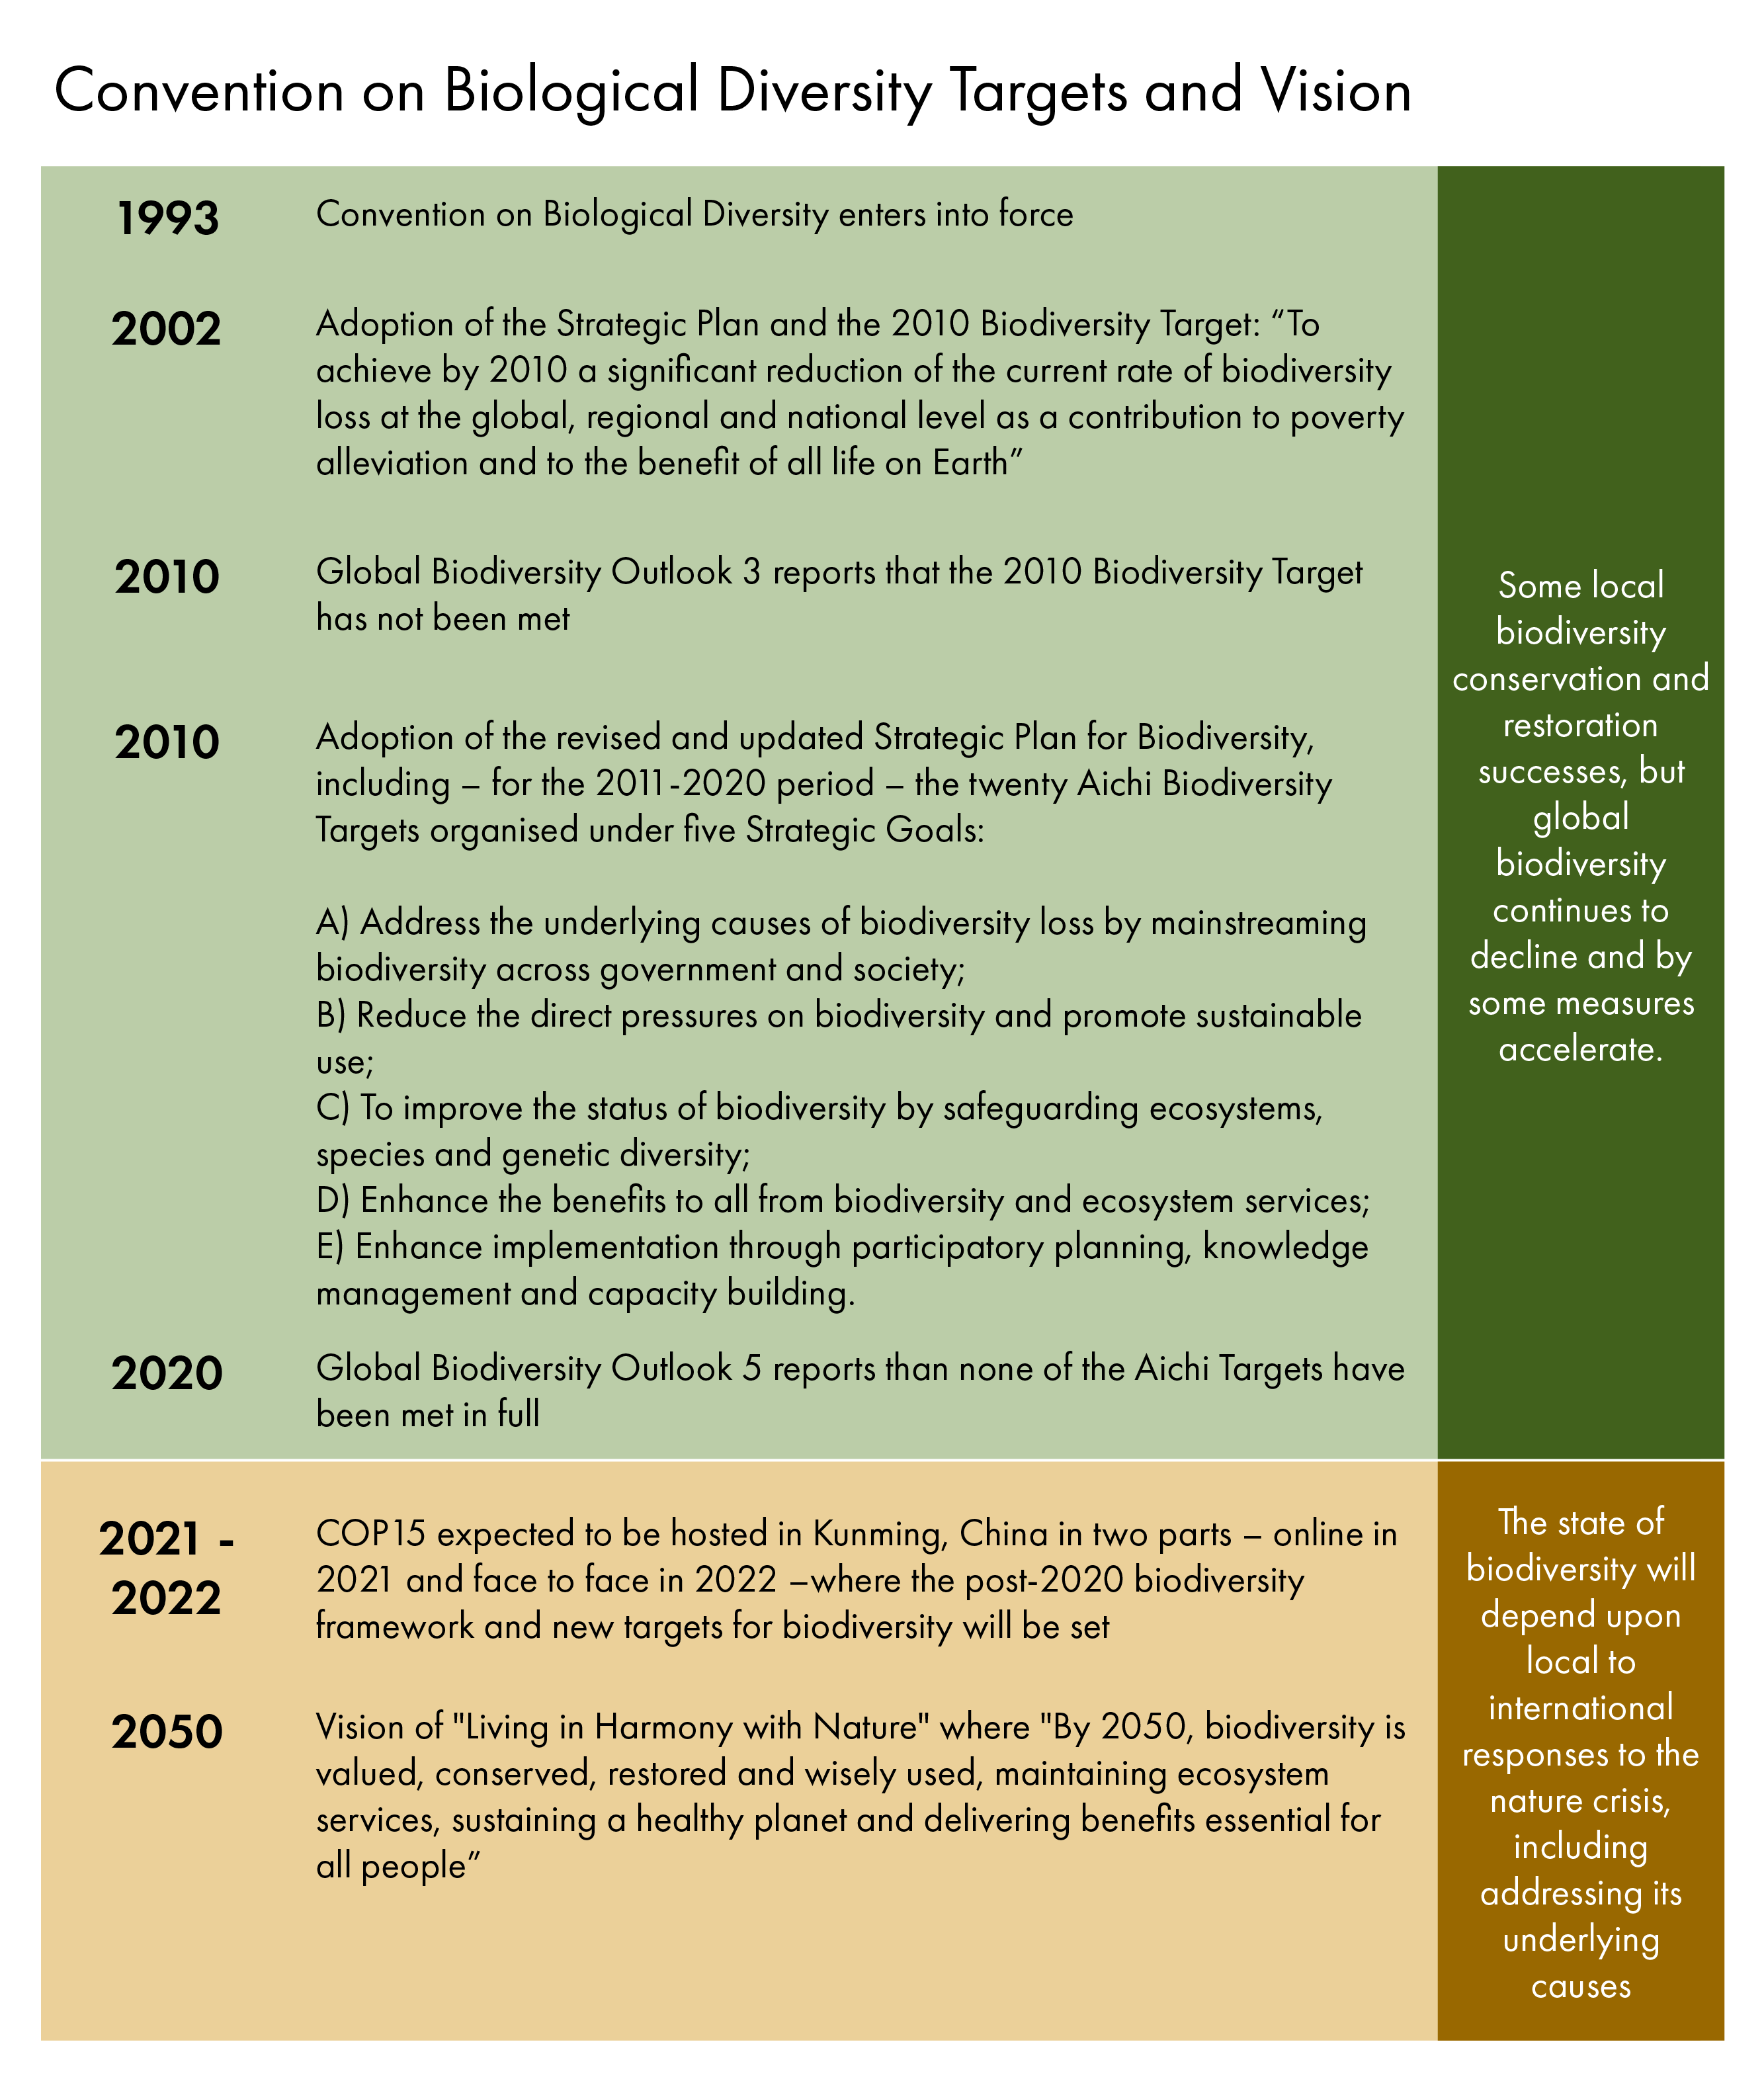 Timeline showing key events for the Convention on Biological Diversity since entering into force in 1993 and expectations ahead of its 2050 Vision of Living in Harmony with Nature. Thus far, biodiversity has continued to decline since the CBD came into force.